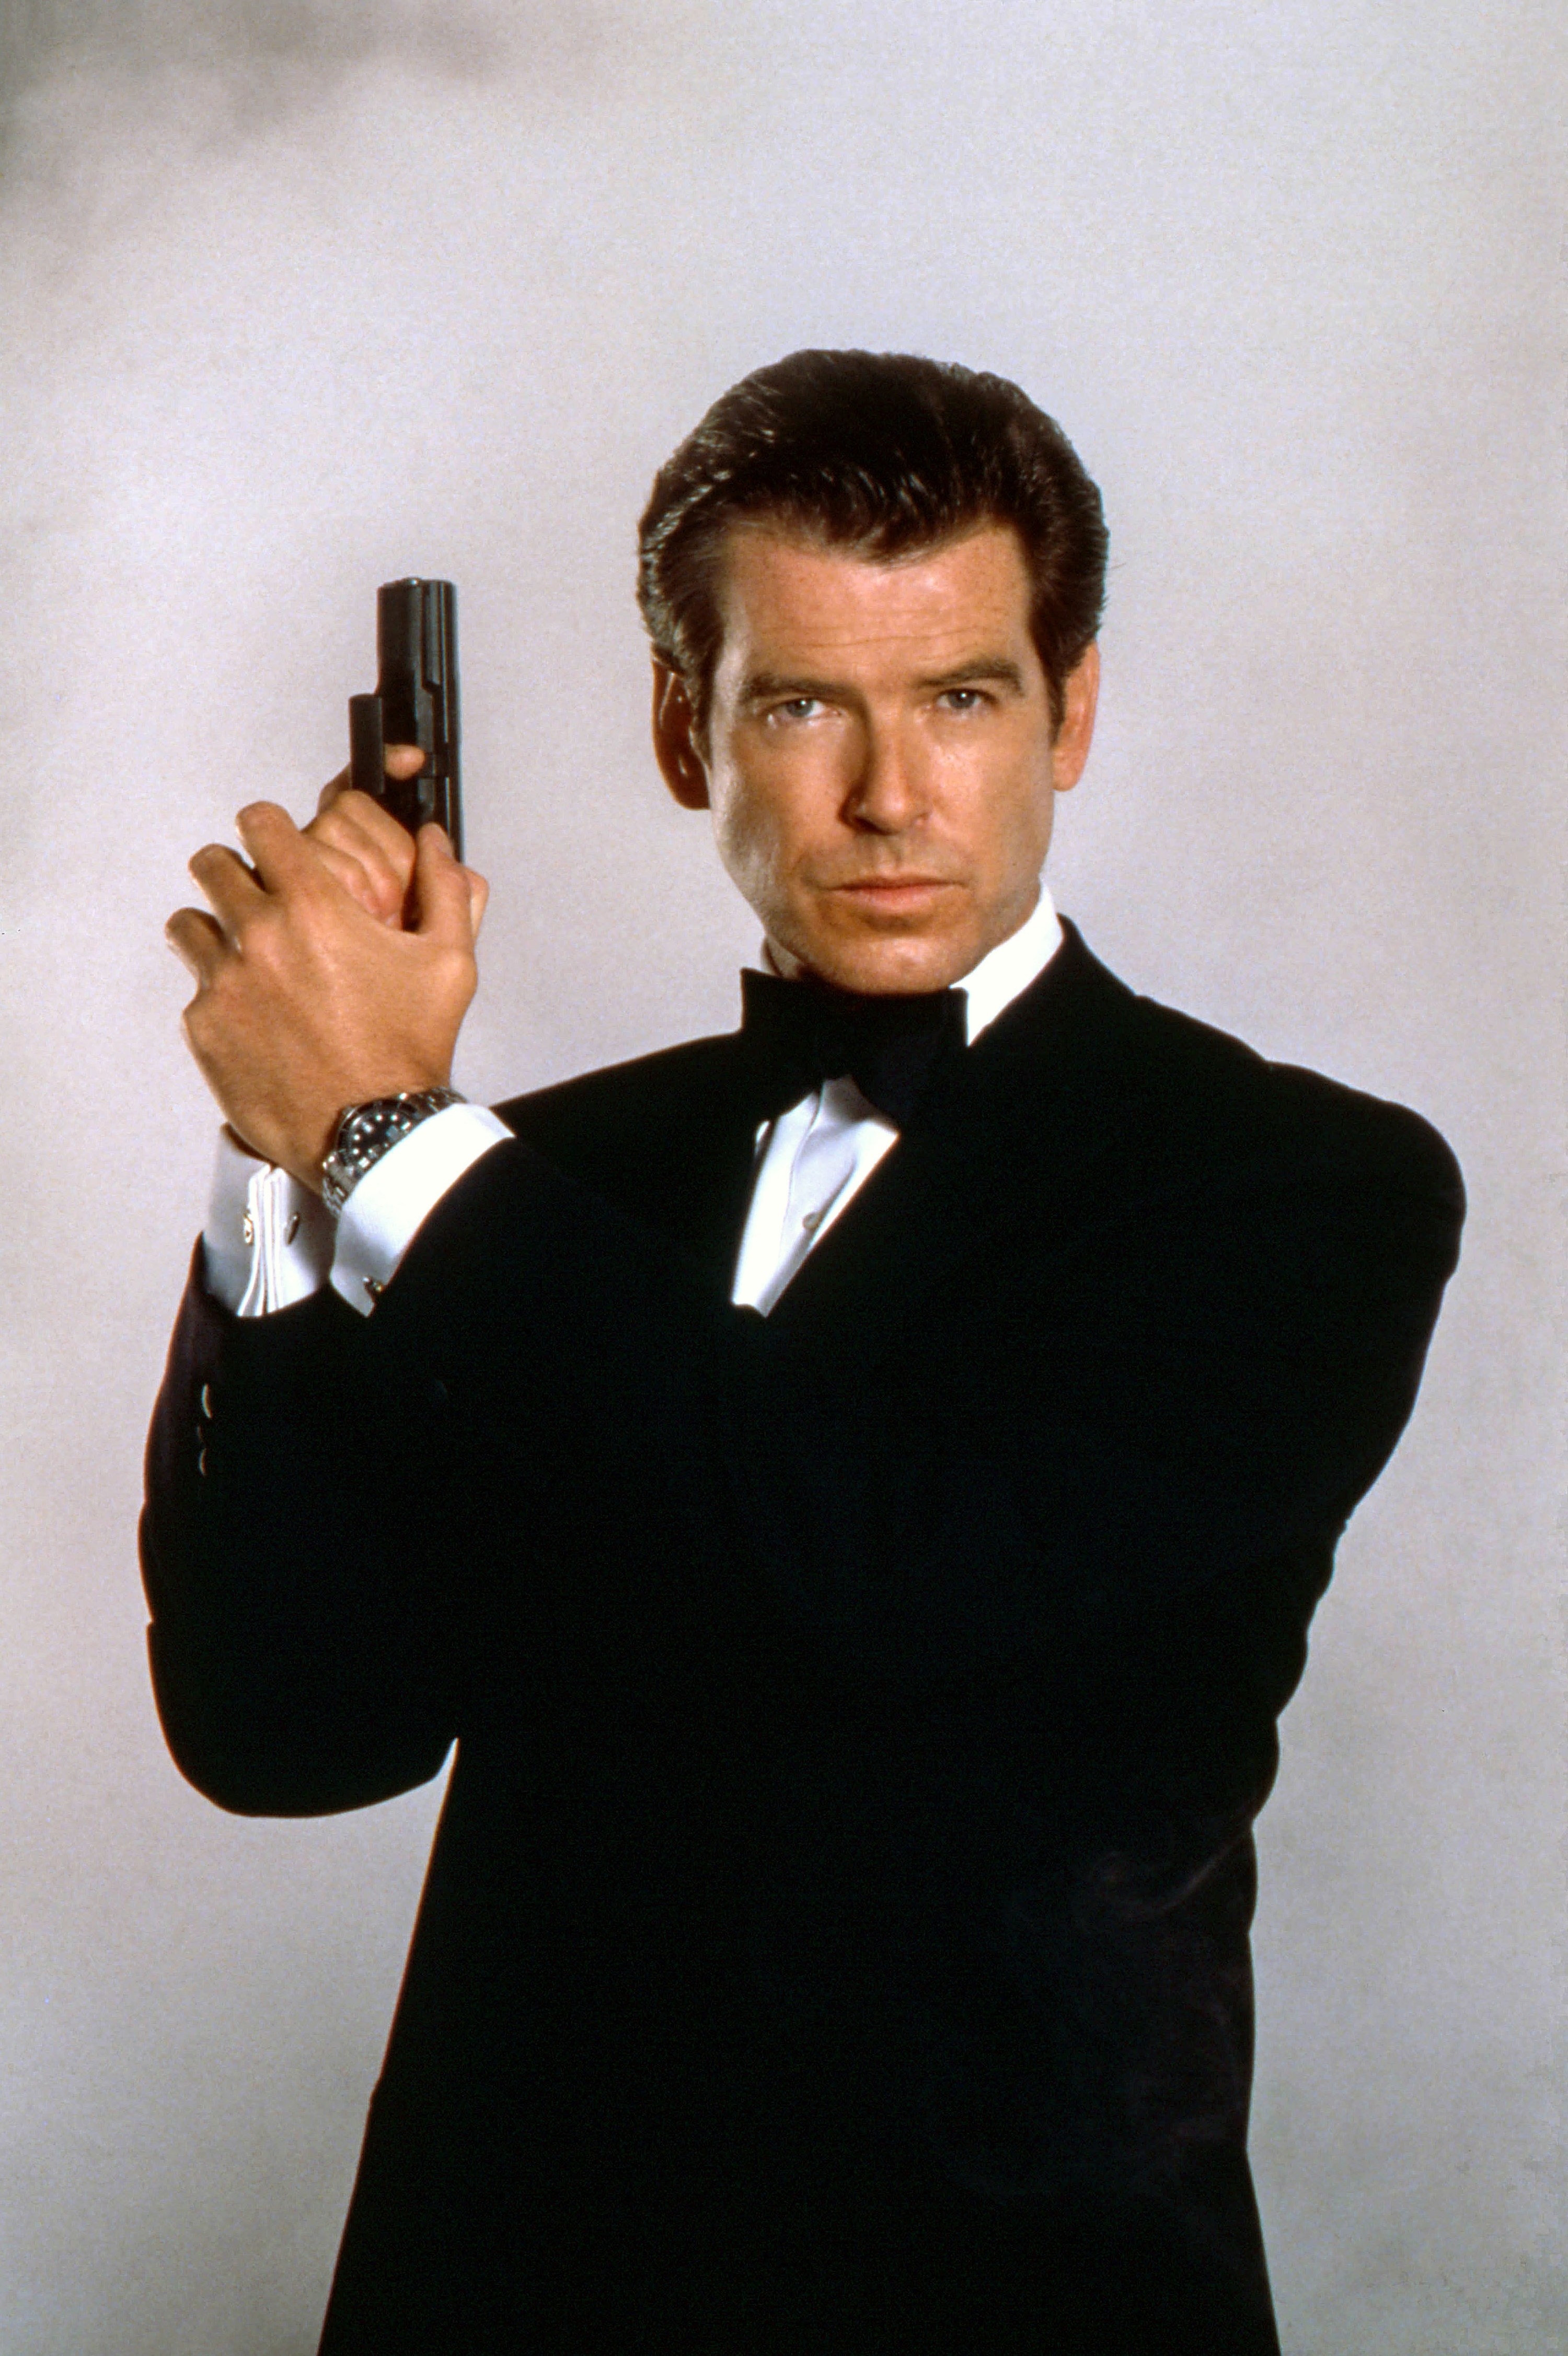 Pierce in a tux and holding a gun